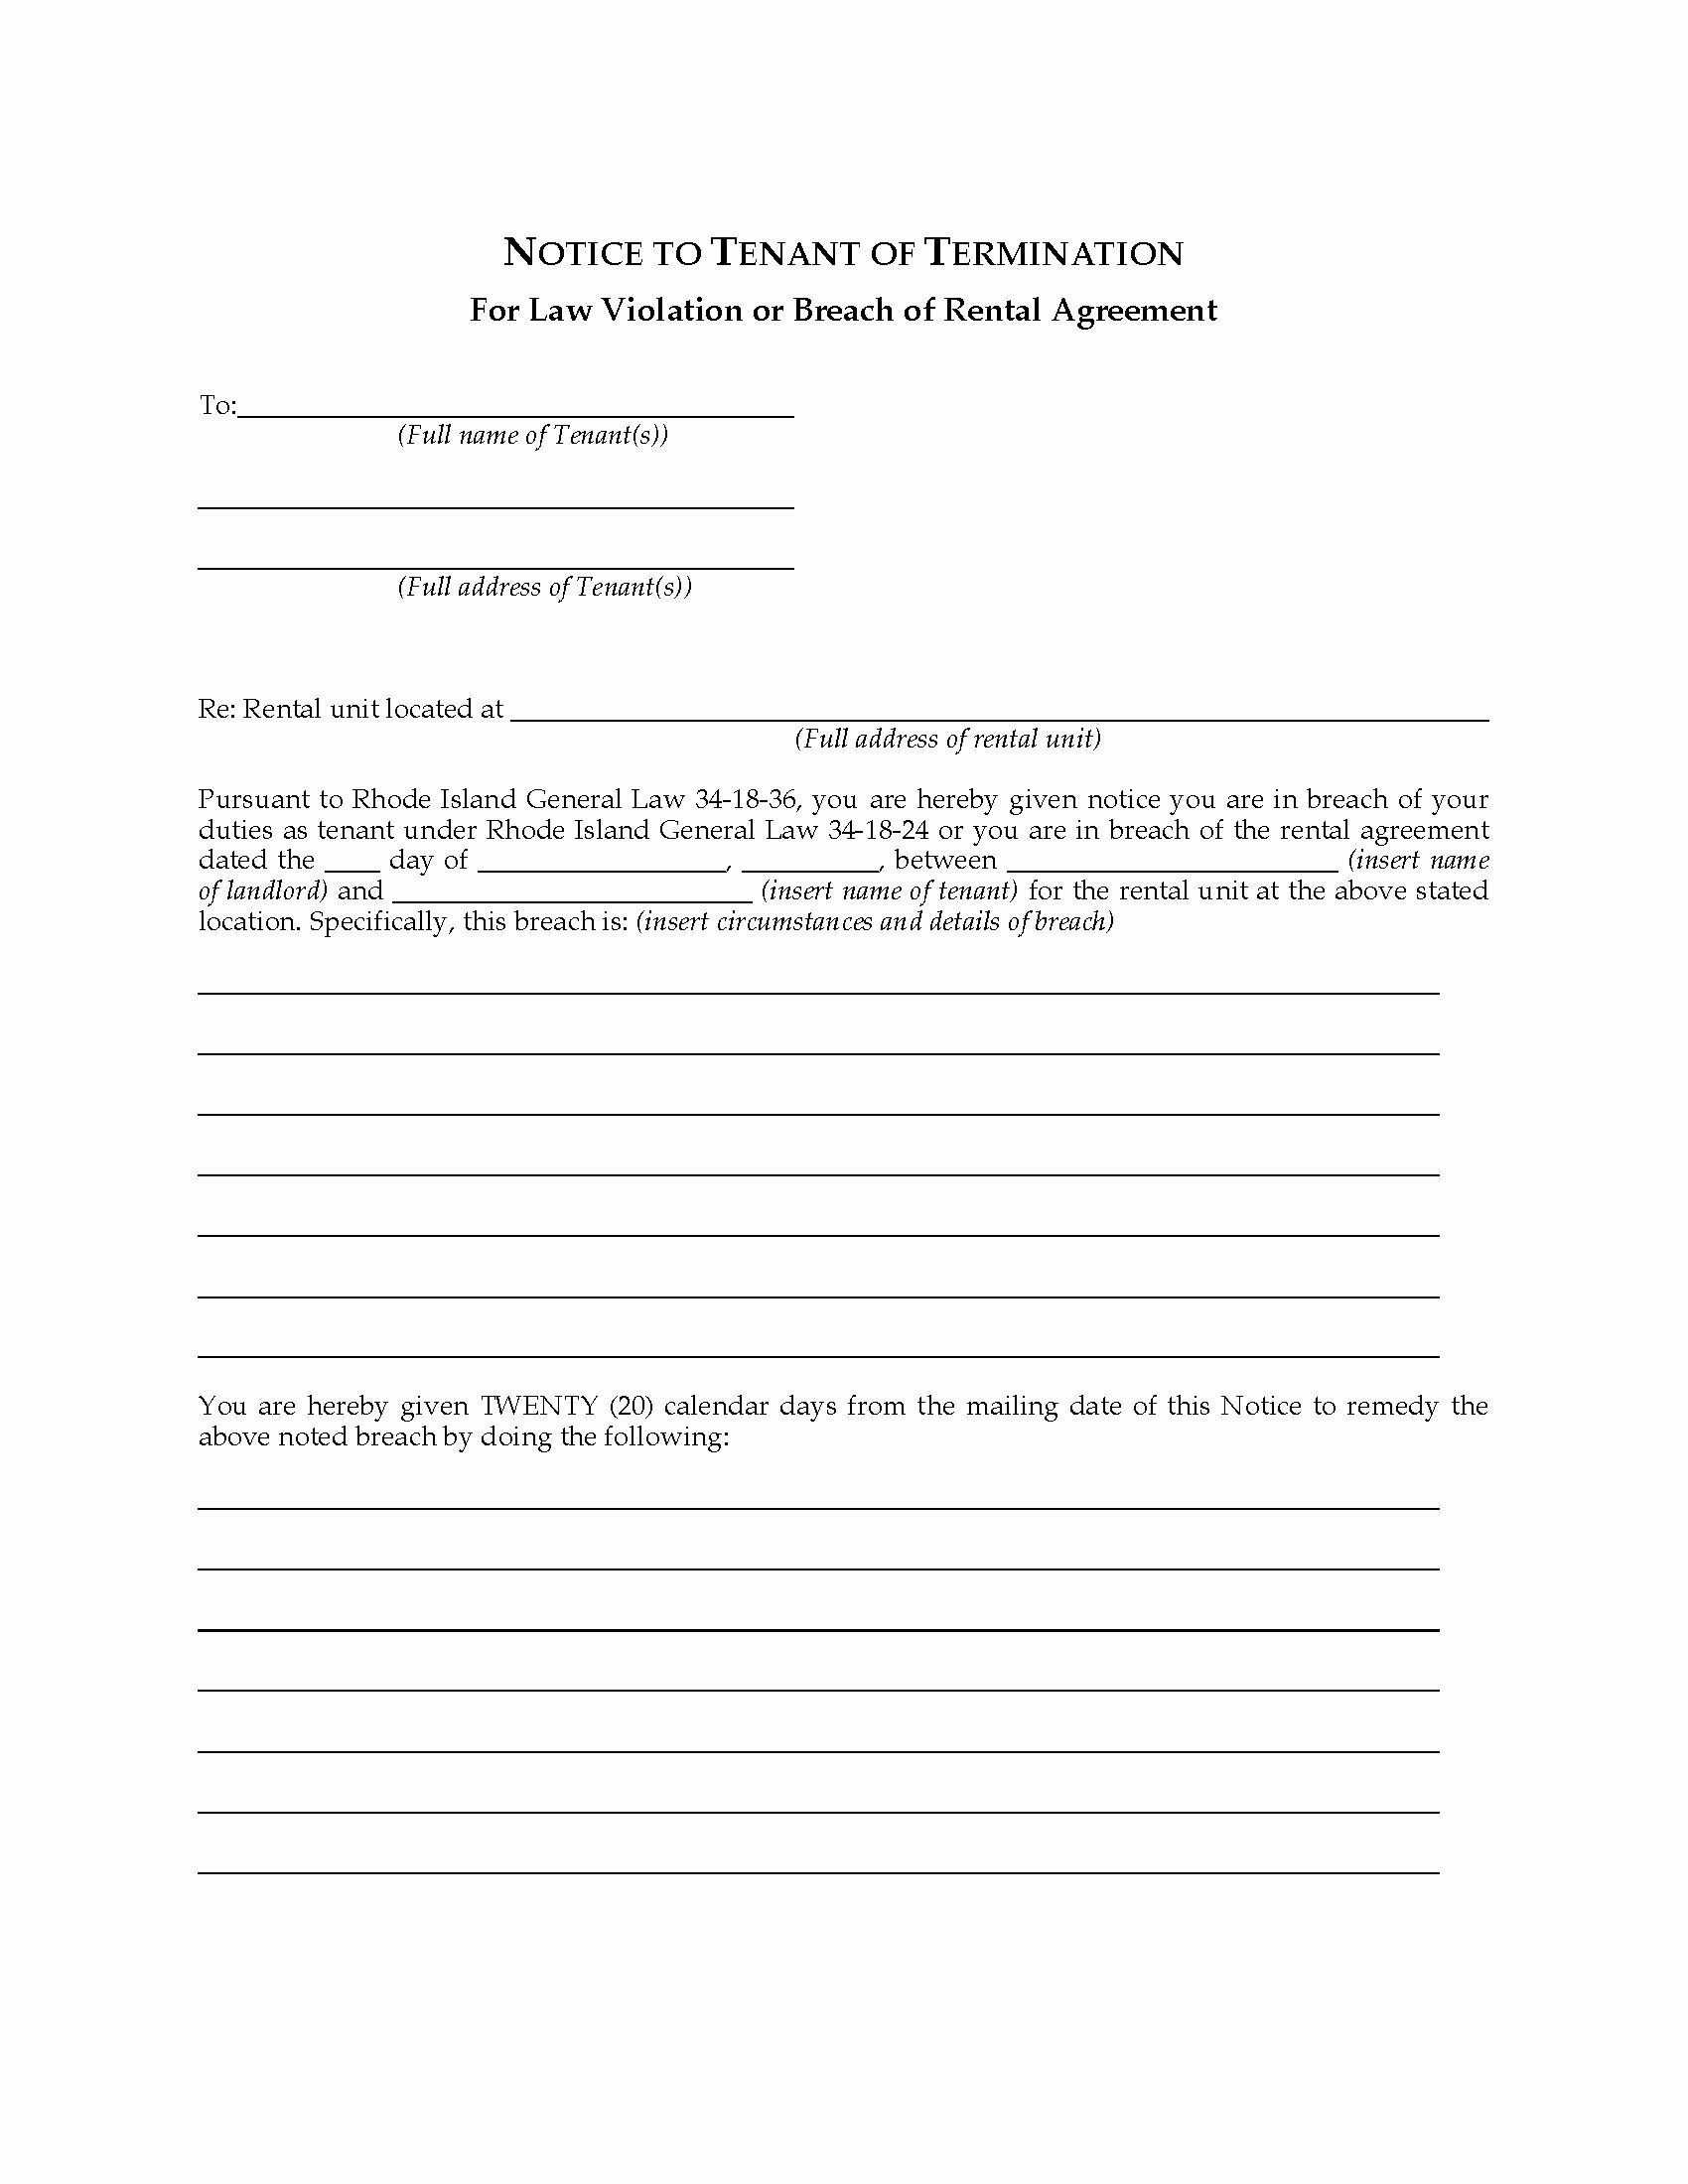 Notice Of Lease Violation Template Unique Rhode island Notice to Tenant Of Termination for Violation